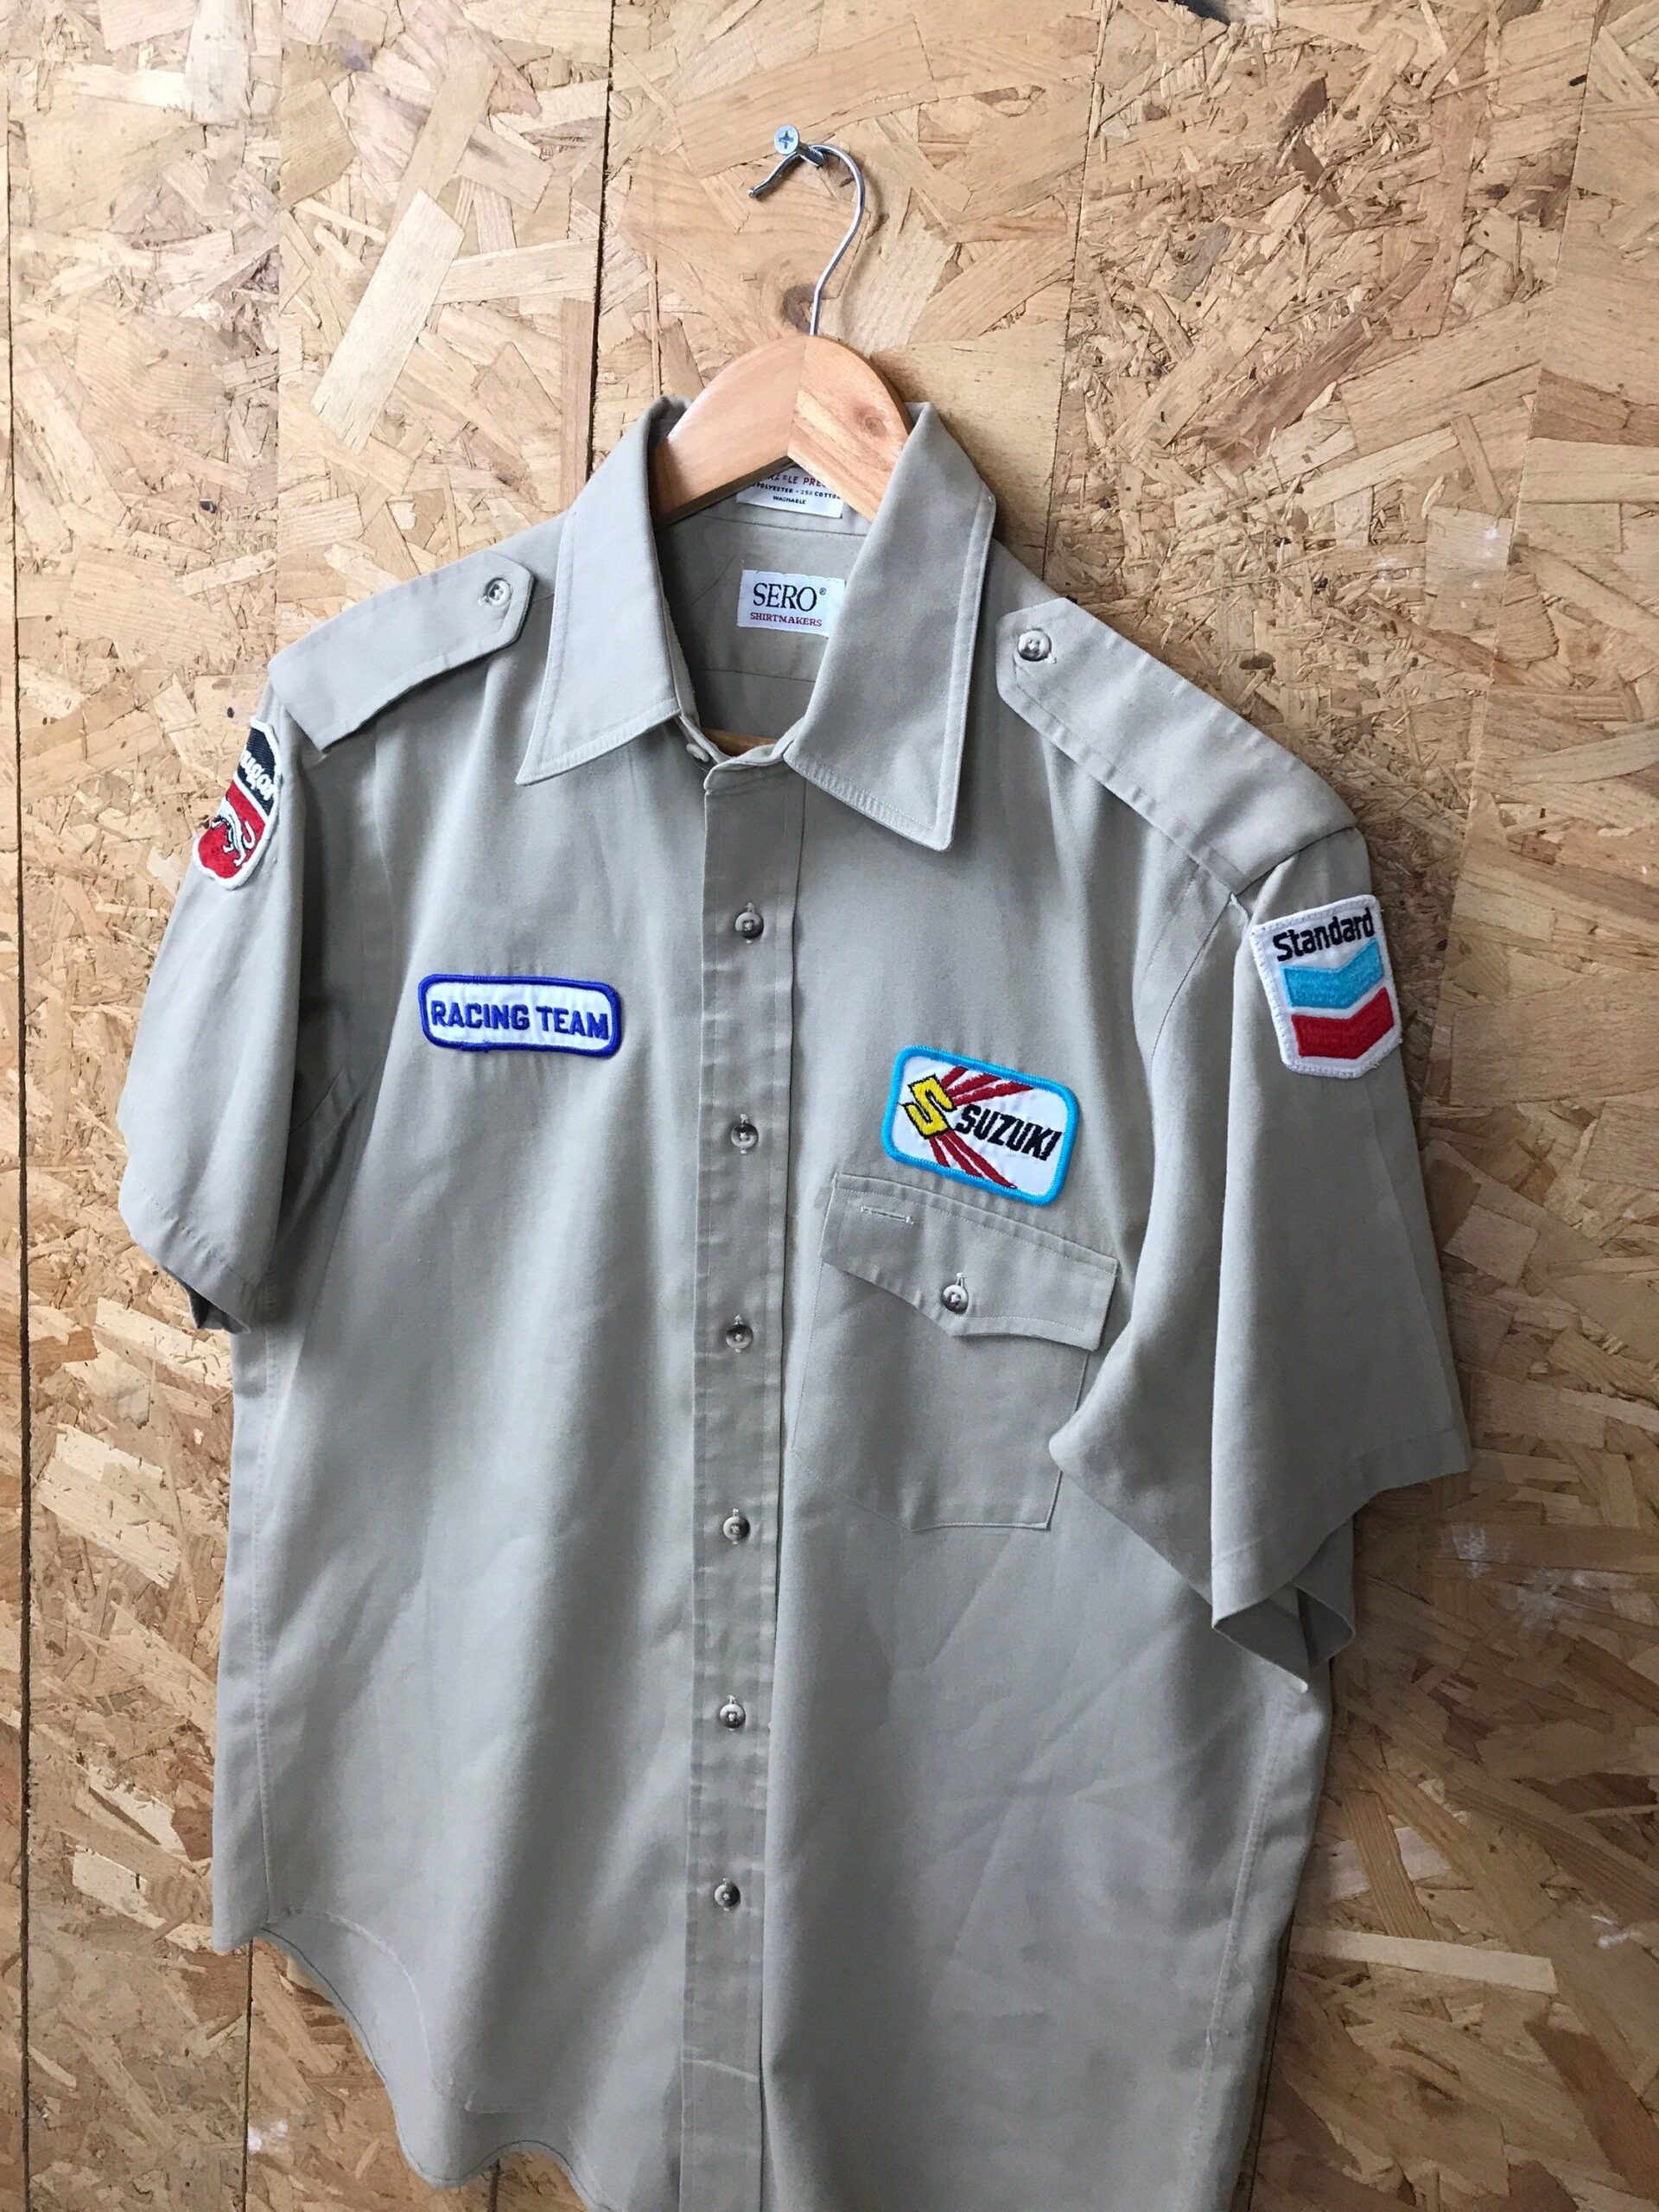 Mechanic Shirts Making Your Time More
Productive